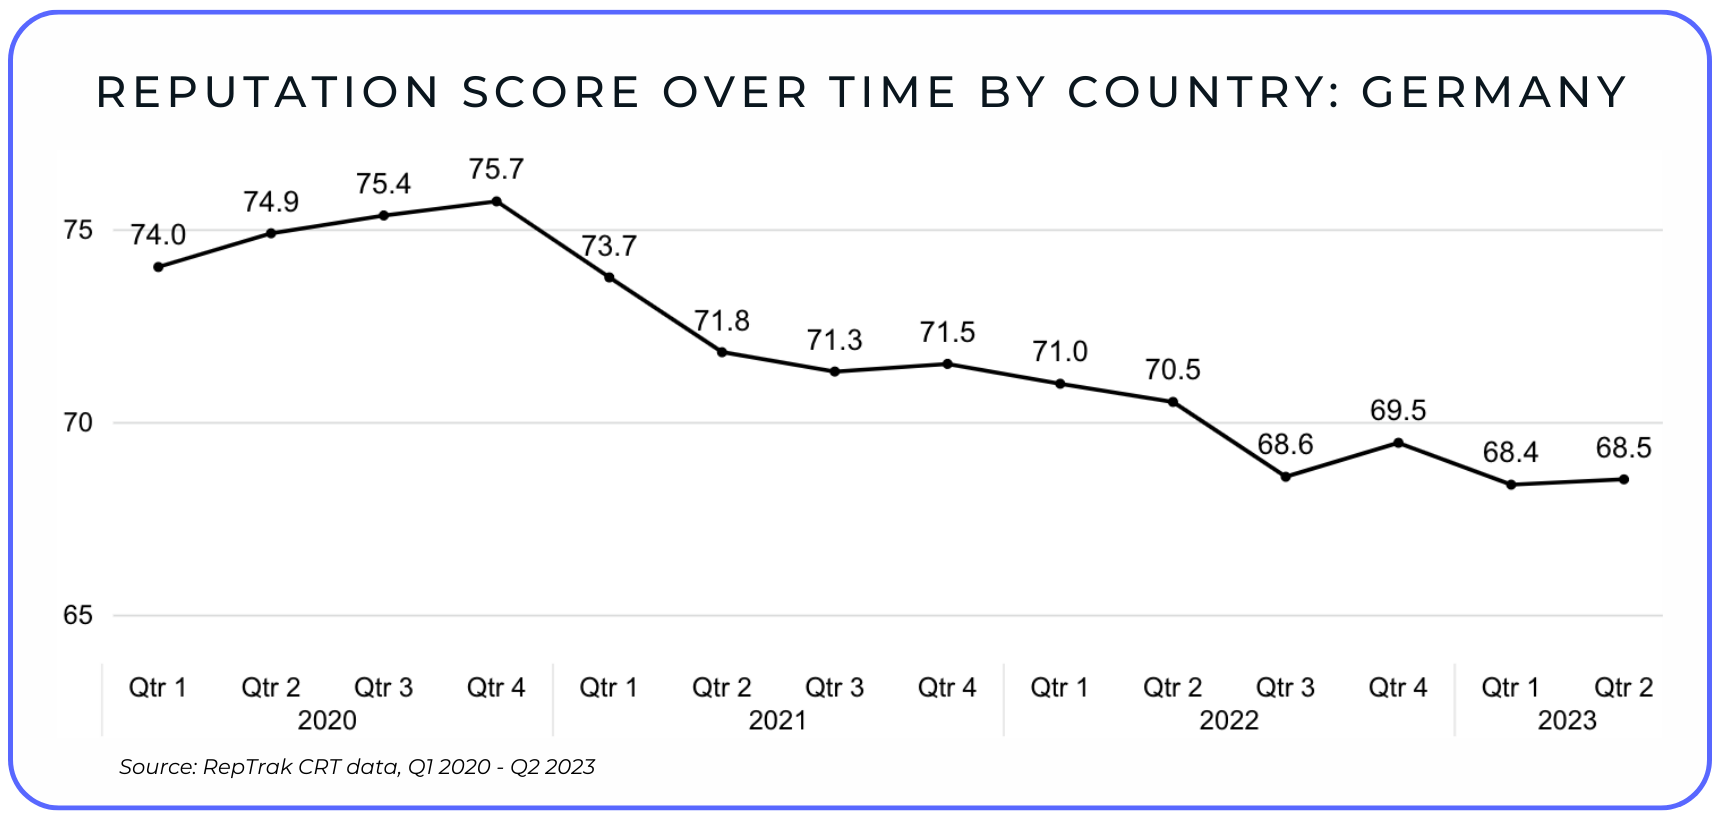 Reputation Score over time by country: Germany